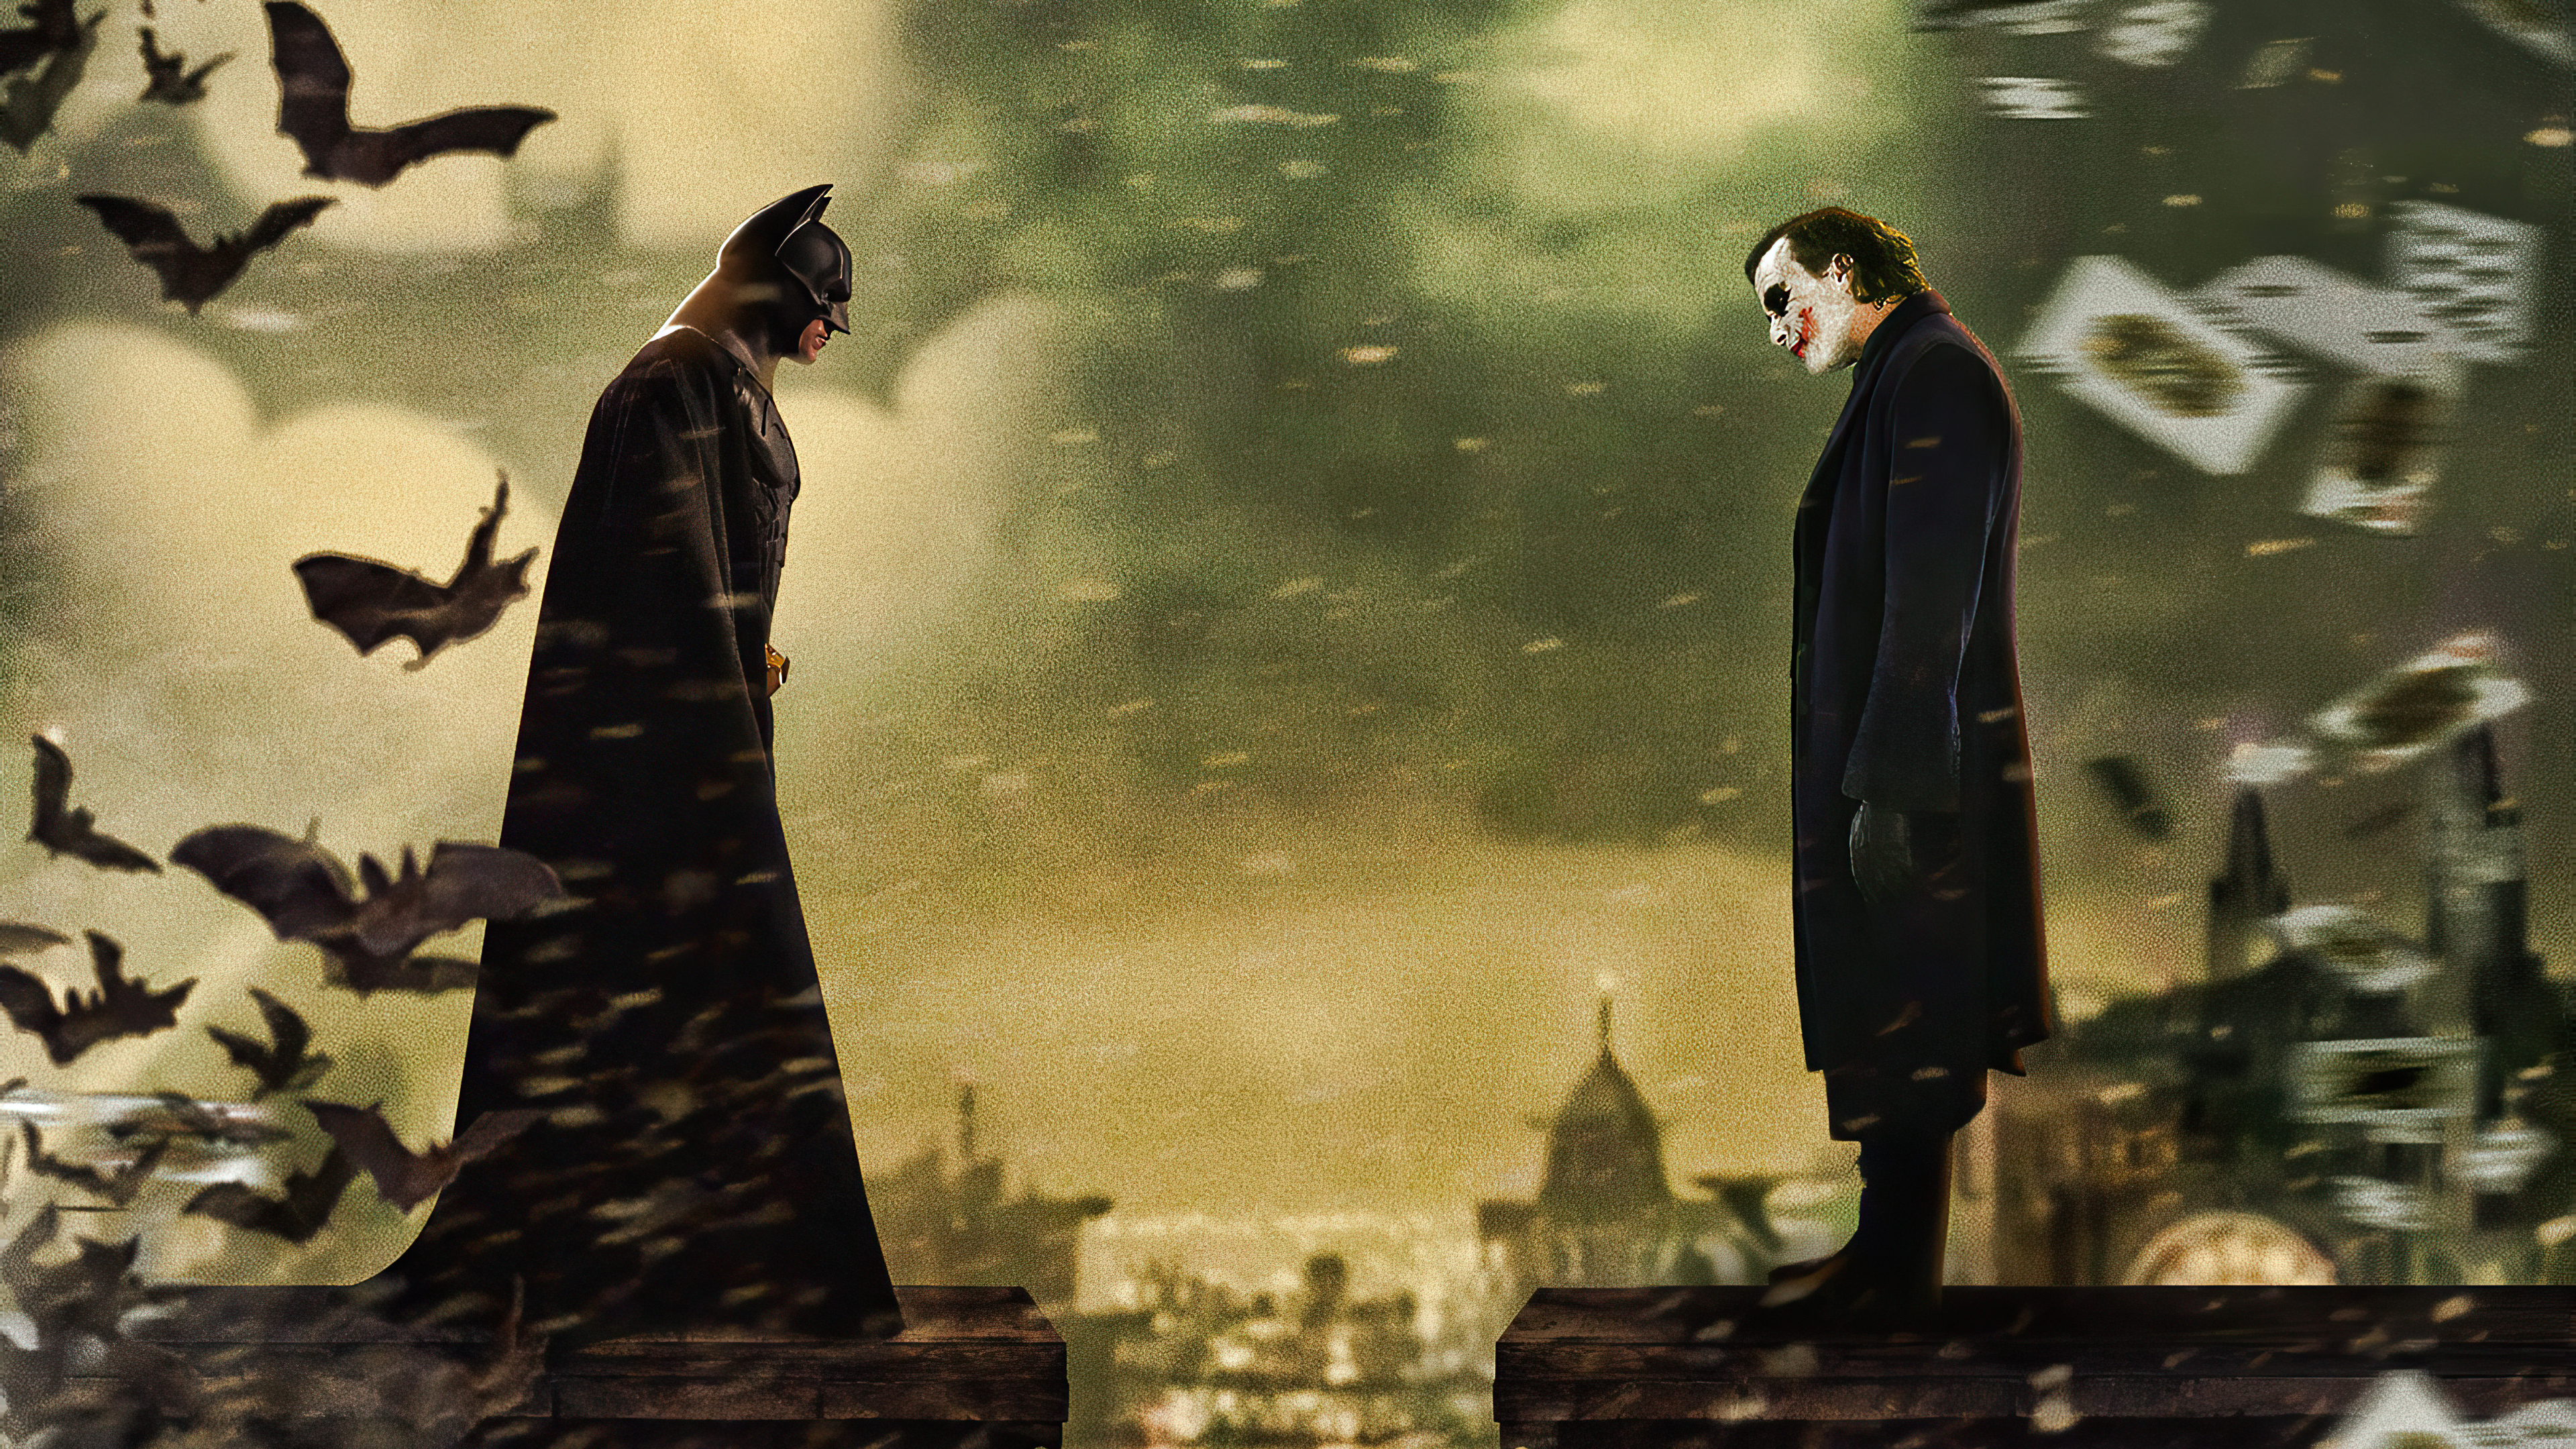 Mobile wallpaper: Batman, Joker, Movie, The Dark Knight, 370898 download  the picture for free.